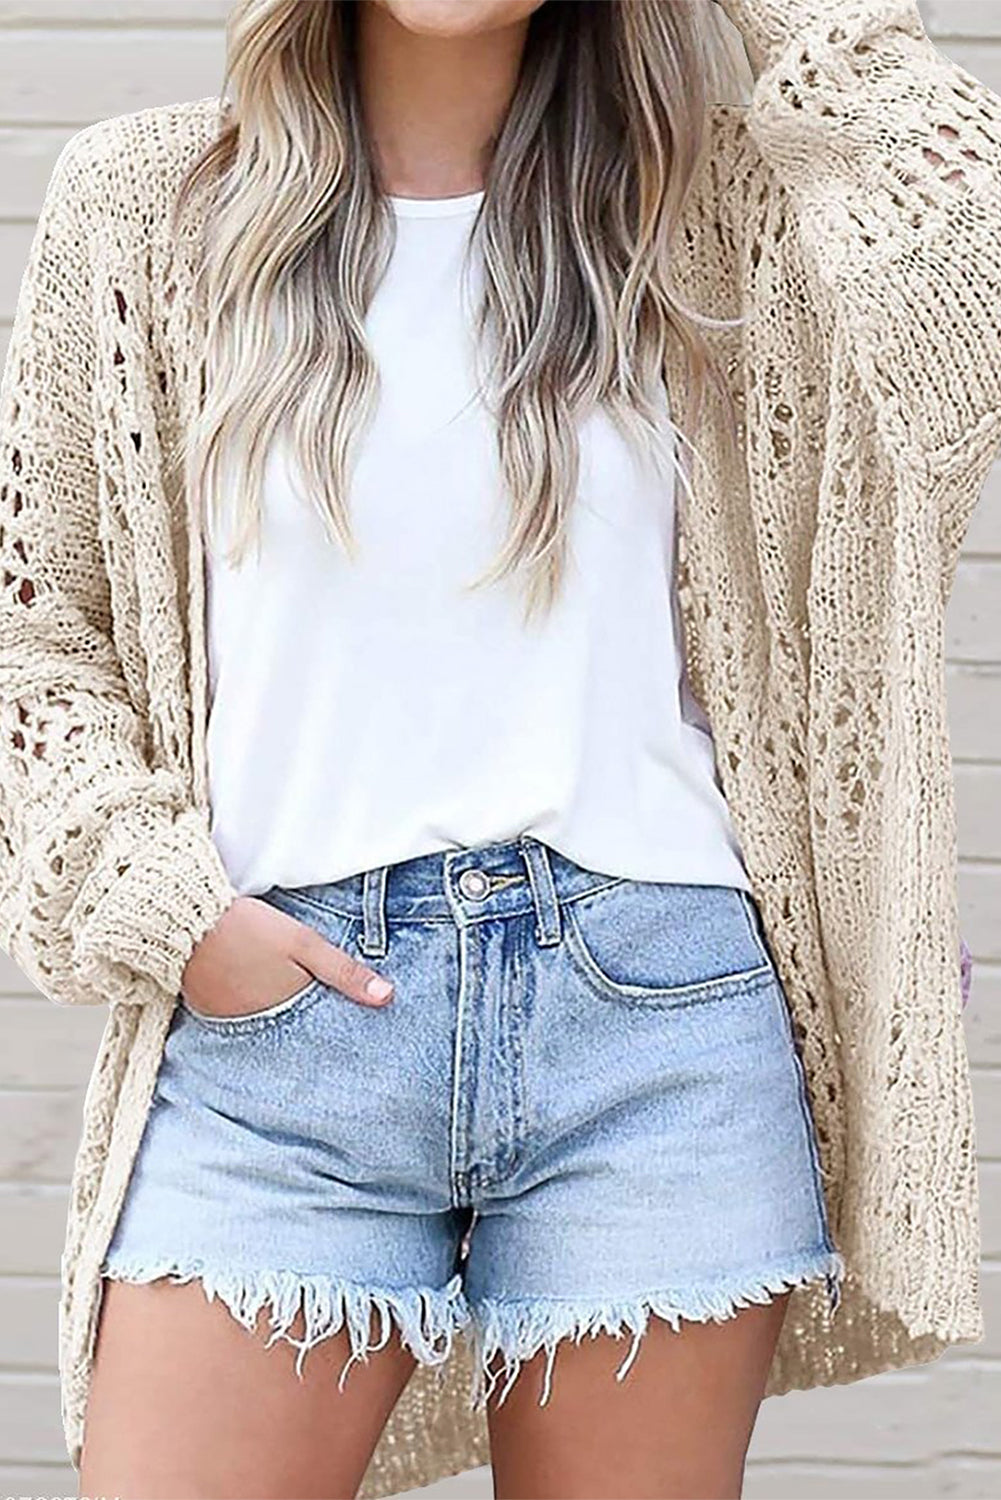 Now This? This is a Boho Cardigan